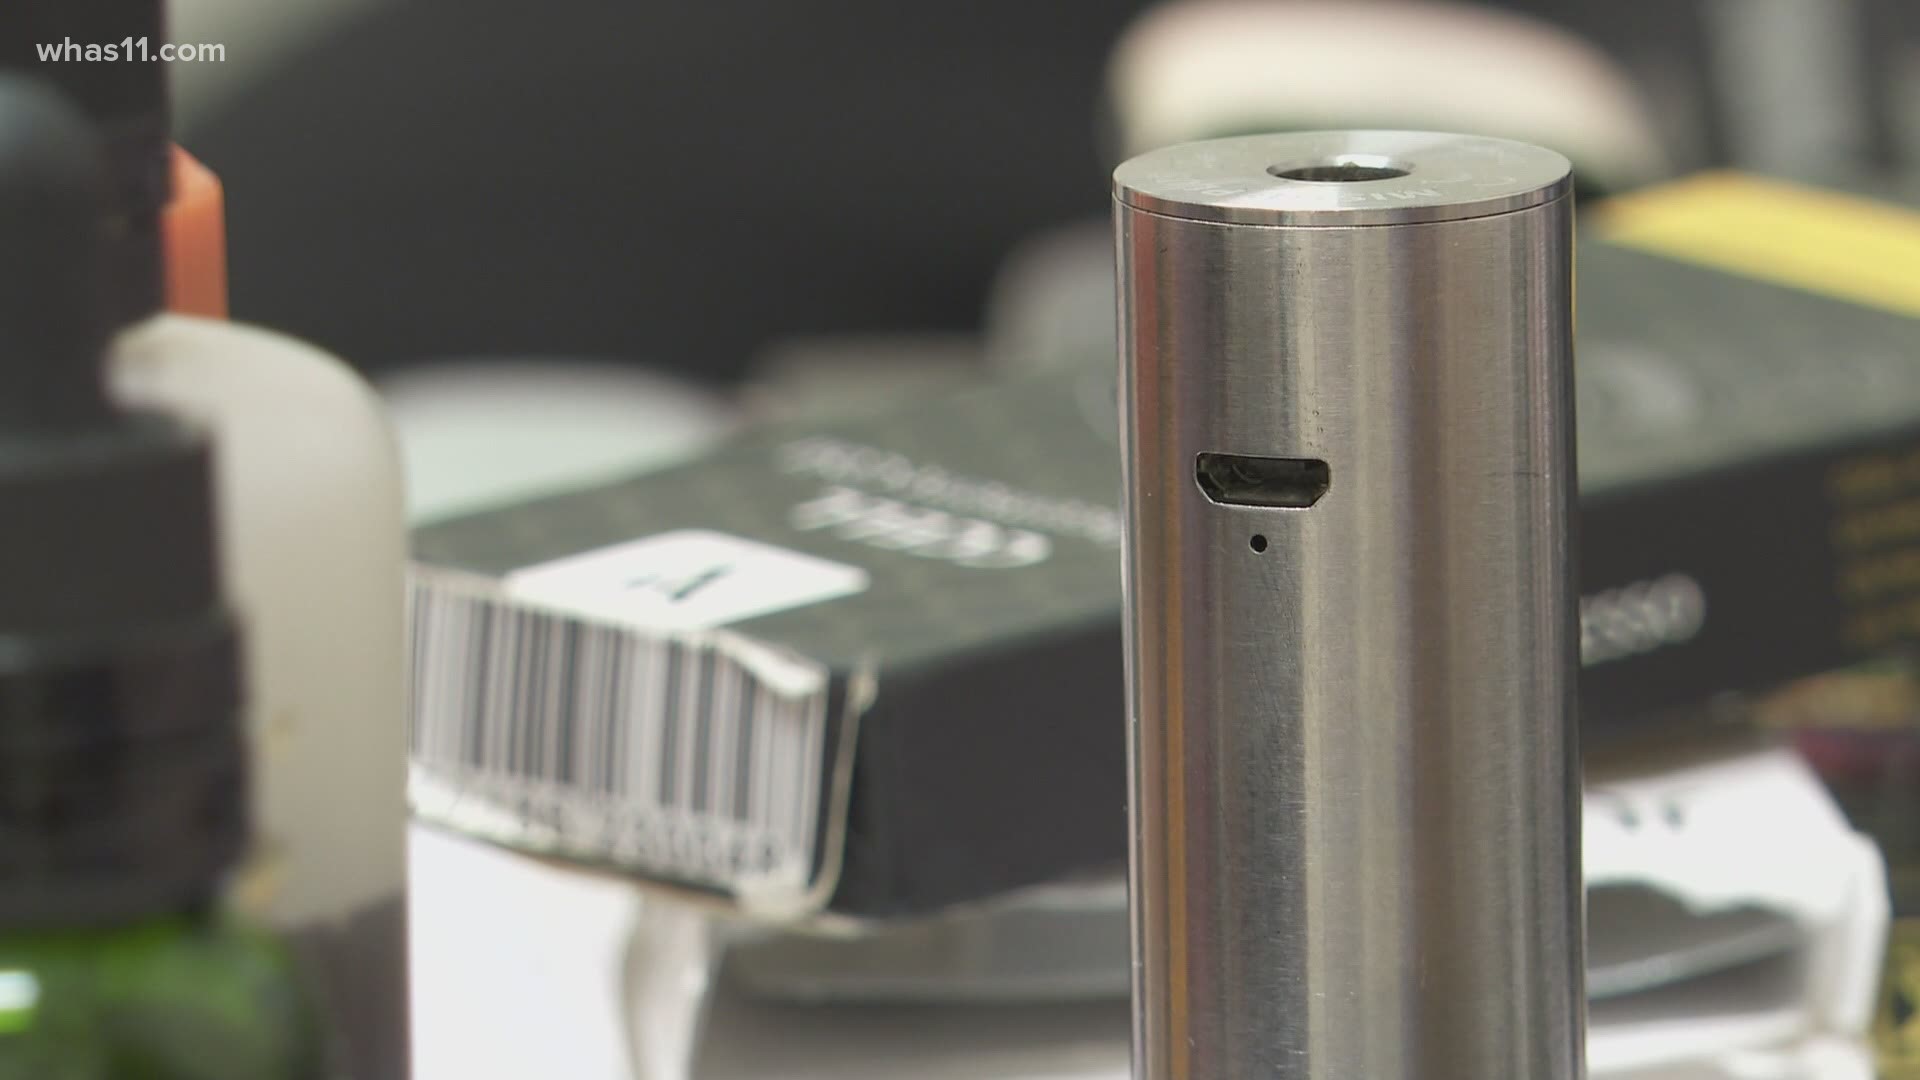 Anyone in Indiana who uses vaping products are going to start paying more for them.